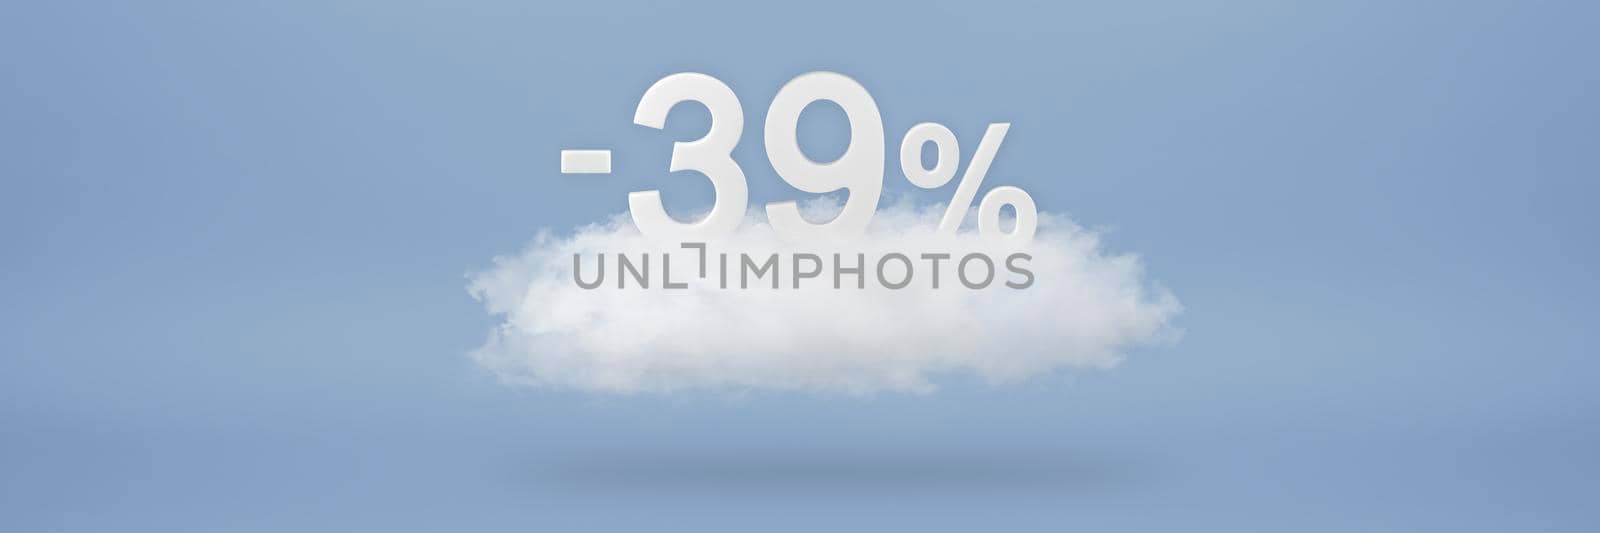 Discount 39 percent. Big discounts, sale up to thirty nine percent. 3D numbers float on a cloud on a blue background. Copy space. Advertising banner and poster to be inserted into the project.